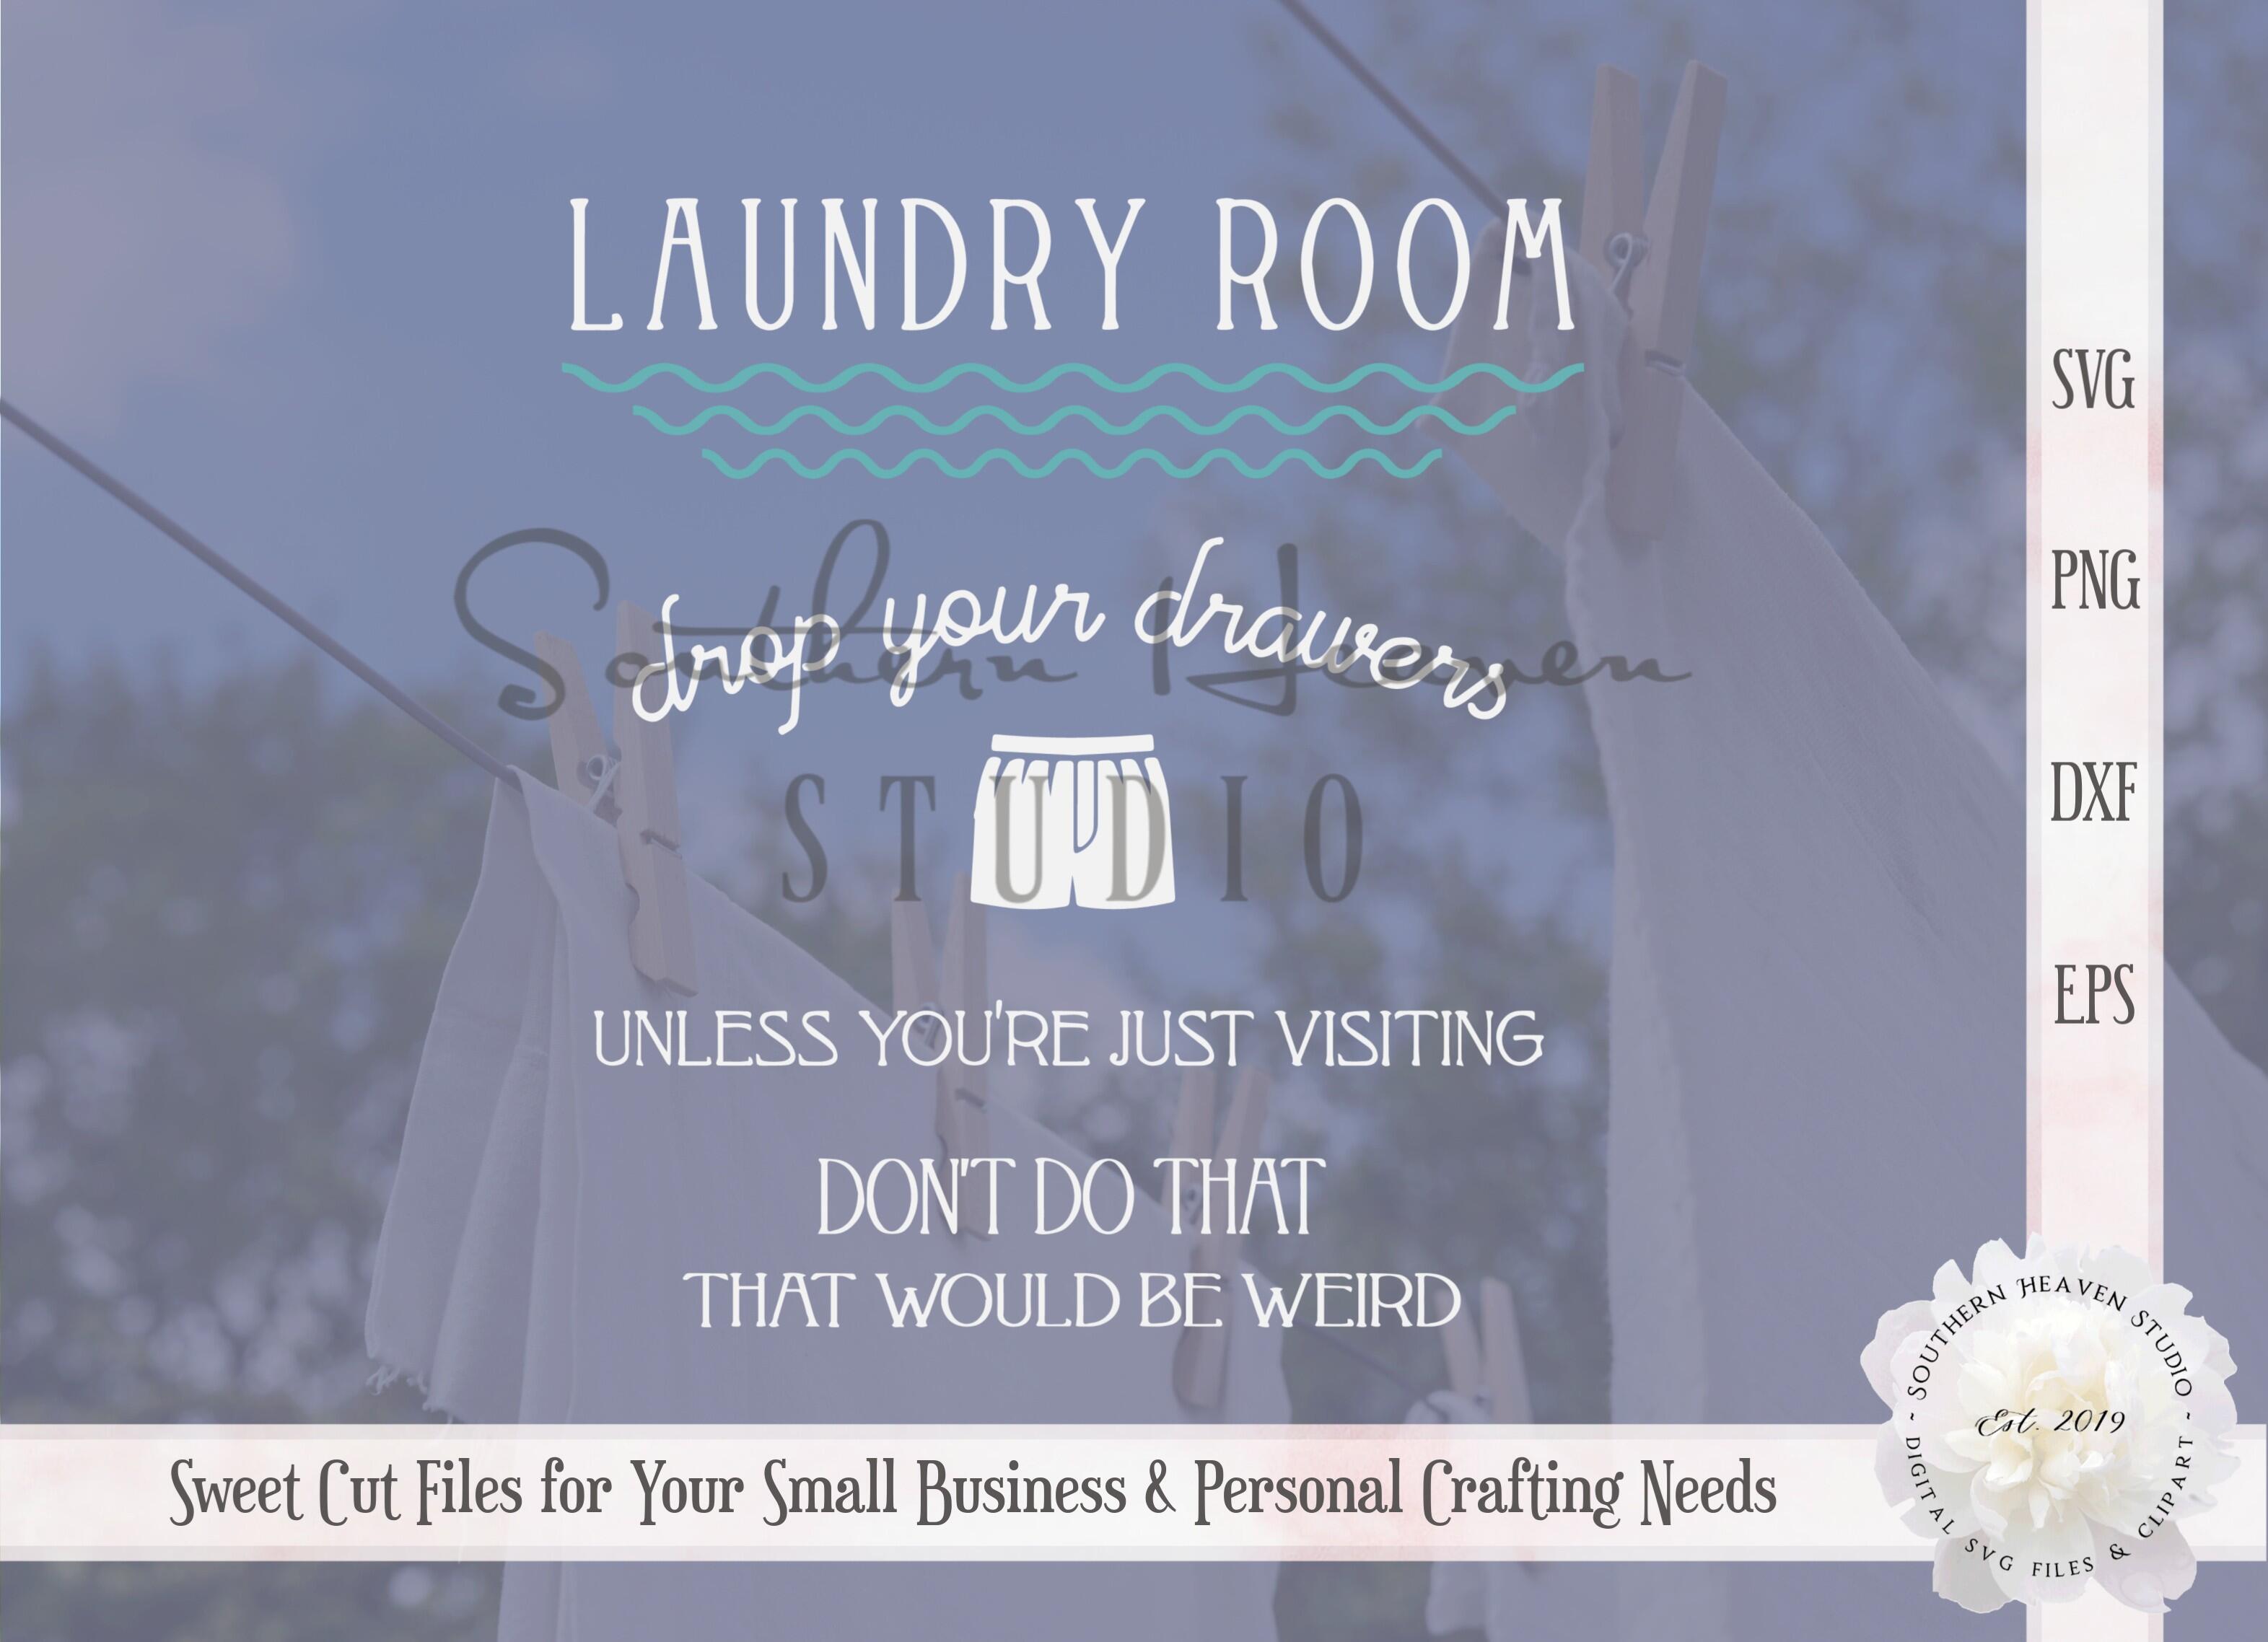 Download Supplies :: Clip Art & Image Files :: DROP YOUR DRAWERS SVG | Vintage Svg | Rustic Laundry ...